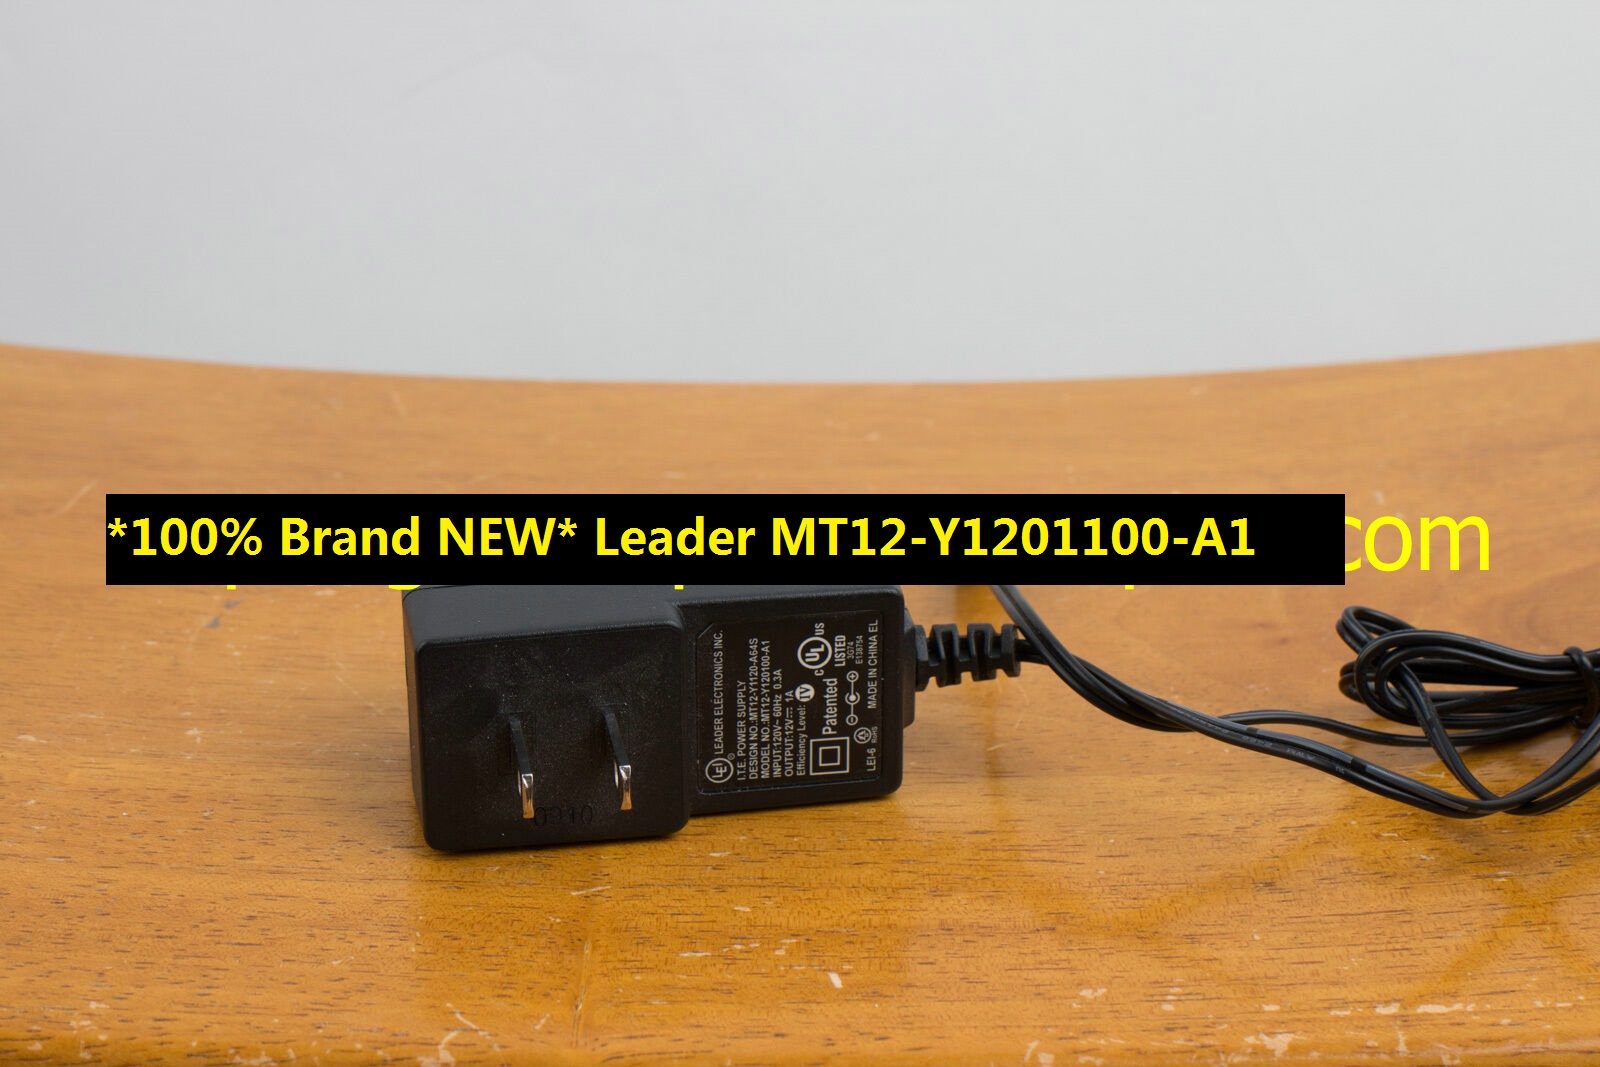 *100% Brand NEW* Leader MT12-Y1201100-A1 for Belkin F6D4230 12V AC Adapter POWER SUPPLY